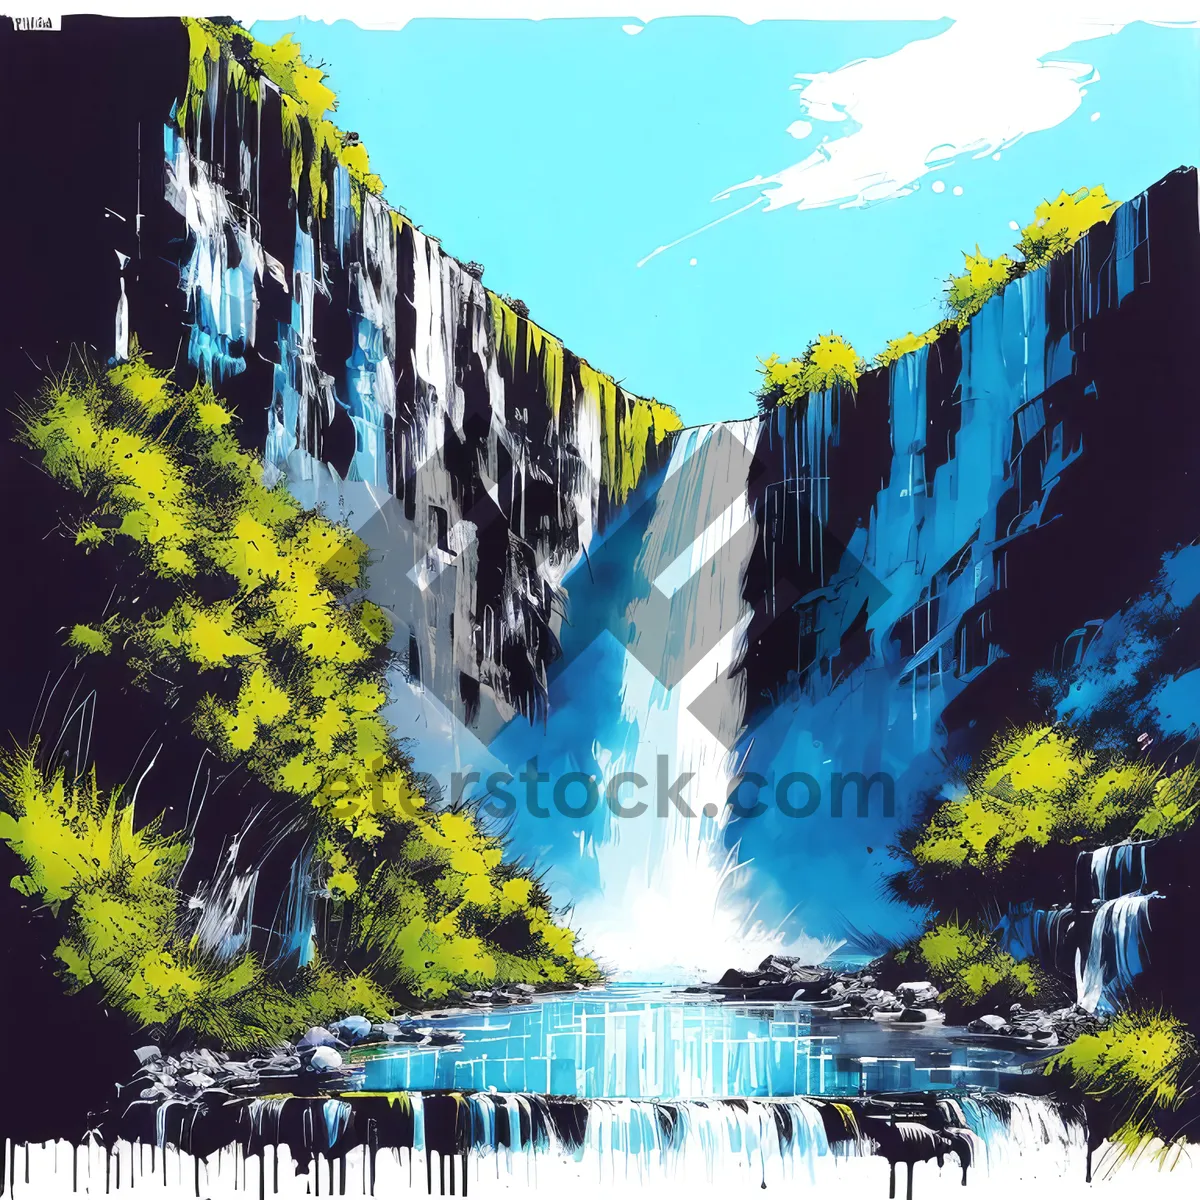 Picture of Serene Summer Landscape with Majestic Waterfall